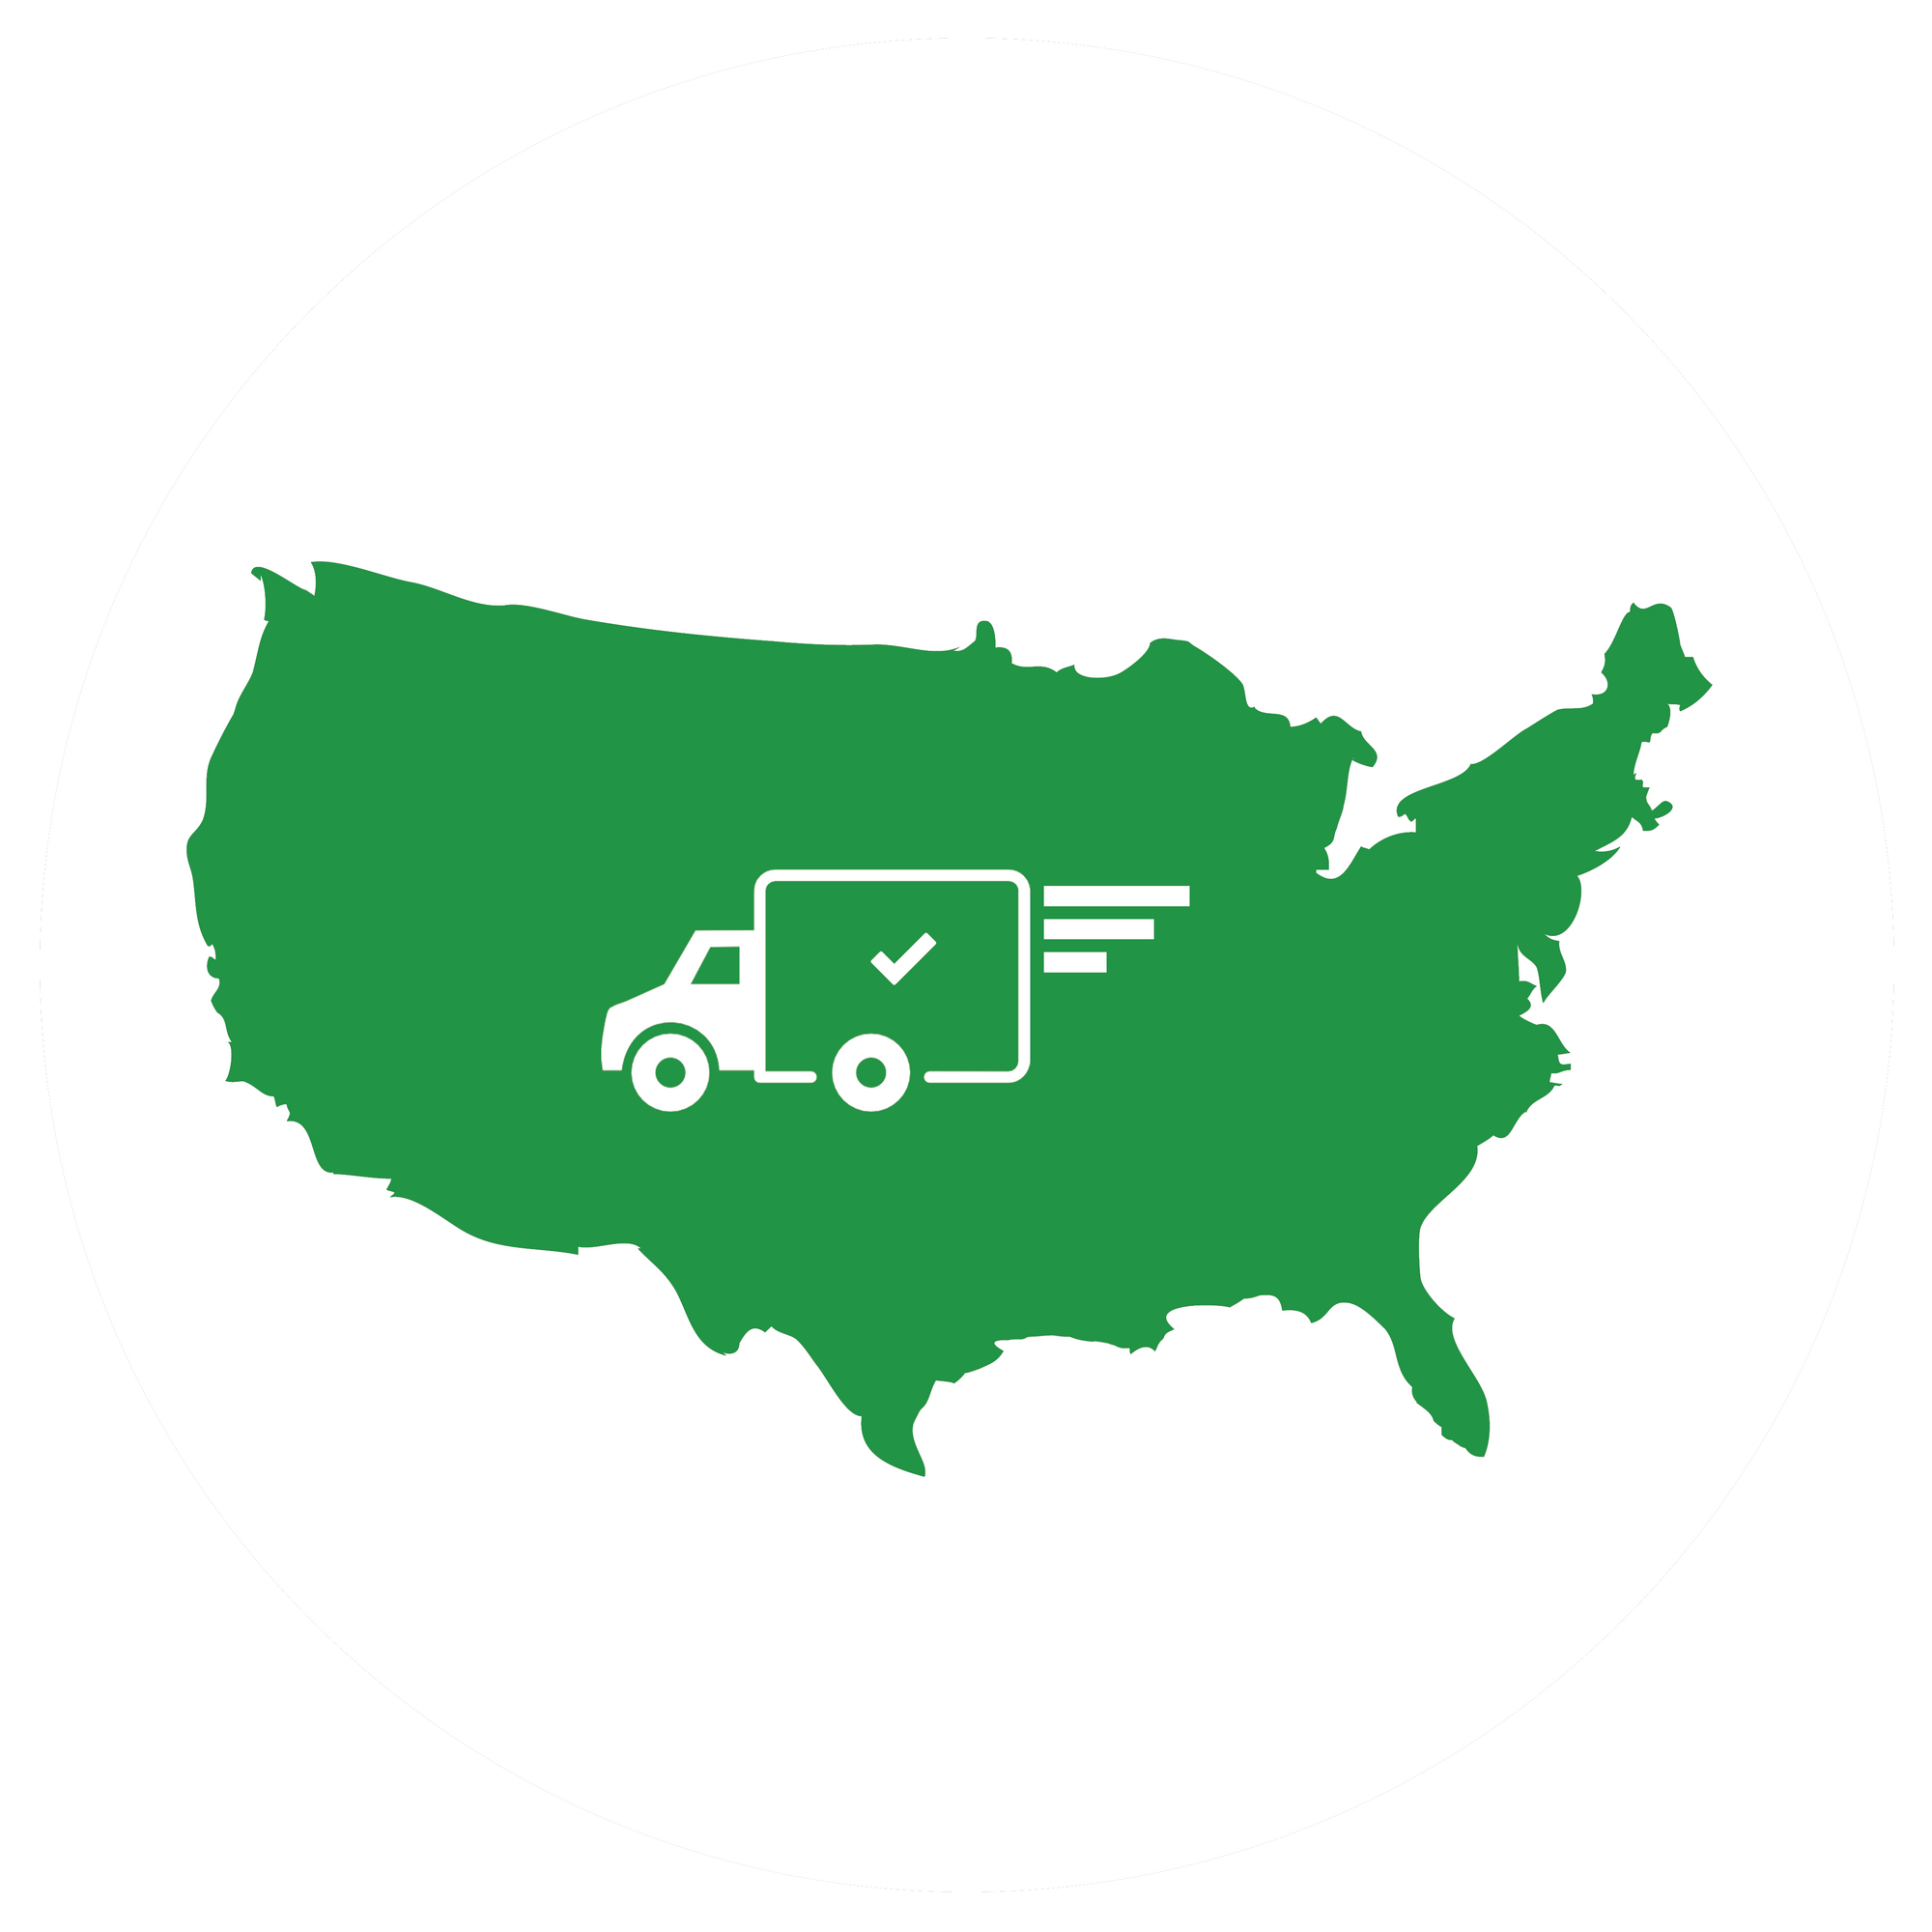 A green map of the United States with a white truck icon driving across it